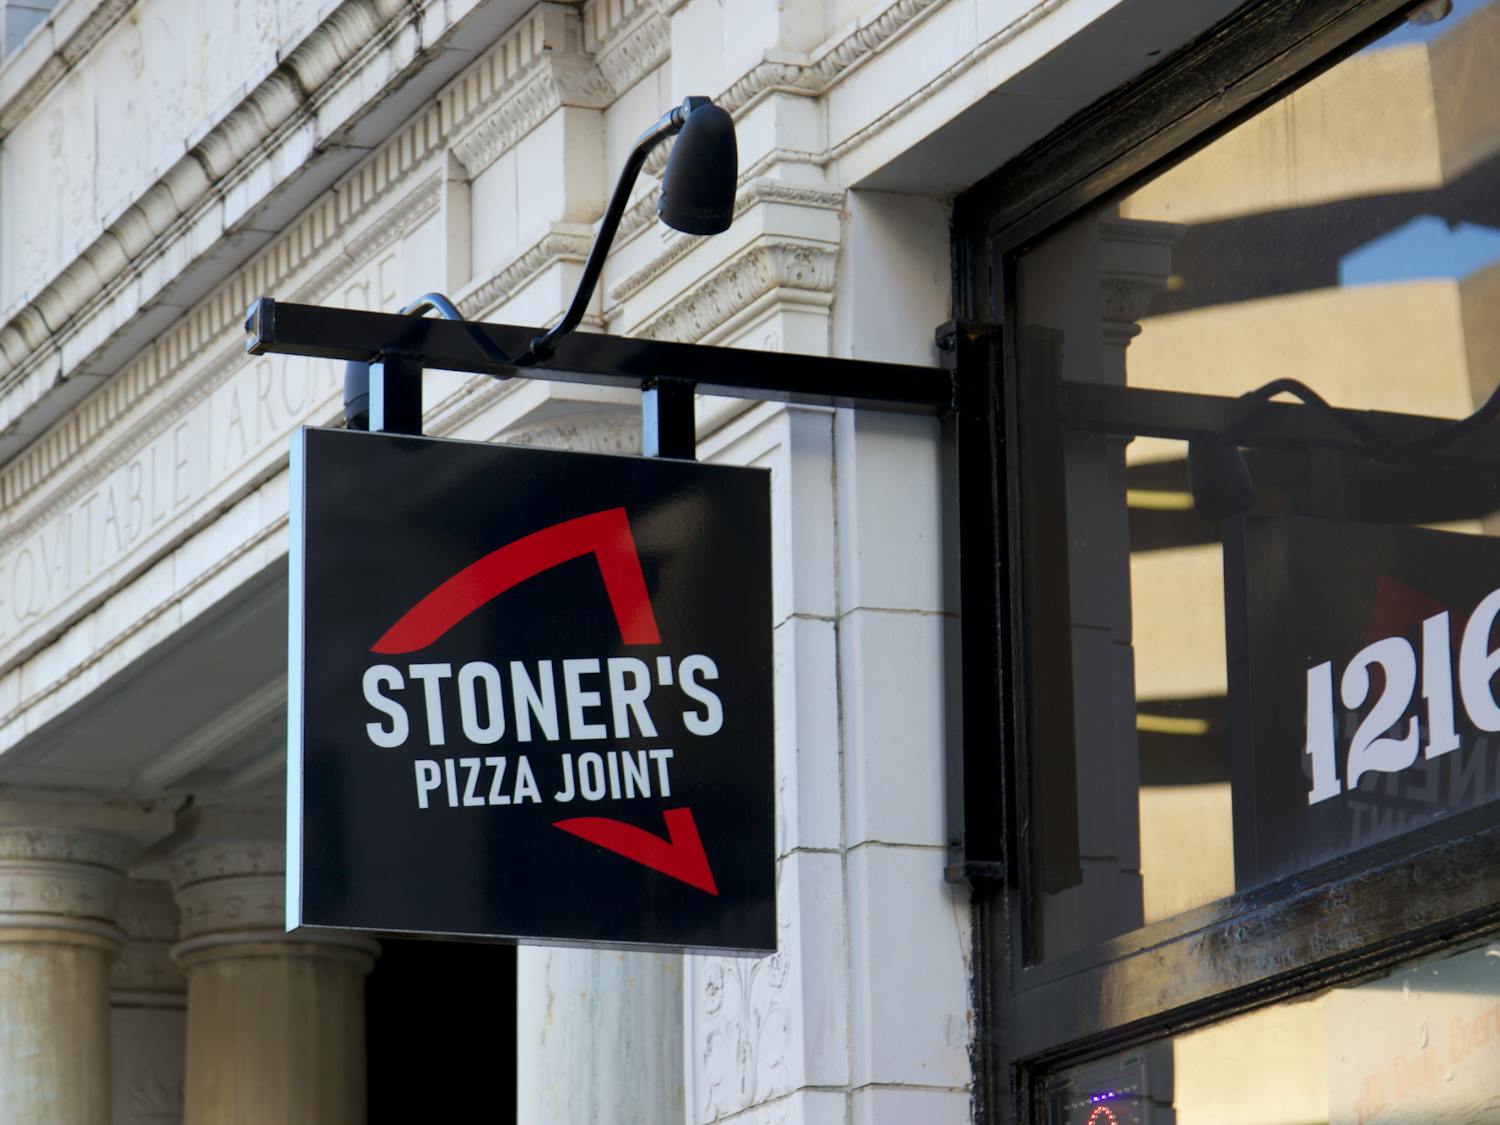 A close of up Stoner's Pizza Joint's sign outside its 1216 Washington St. location in Columbia, SC.